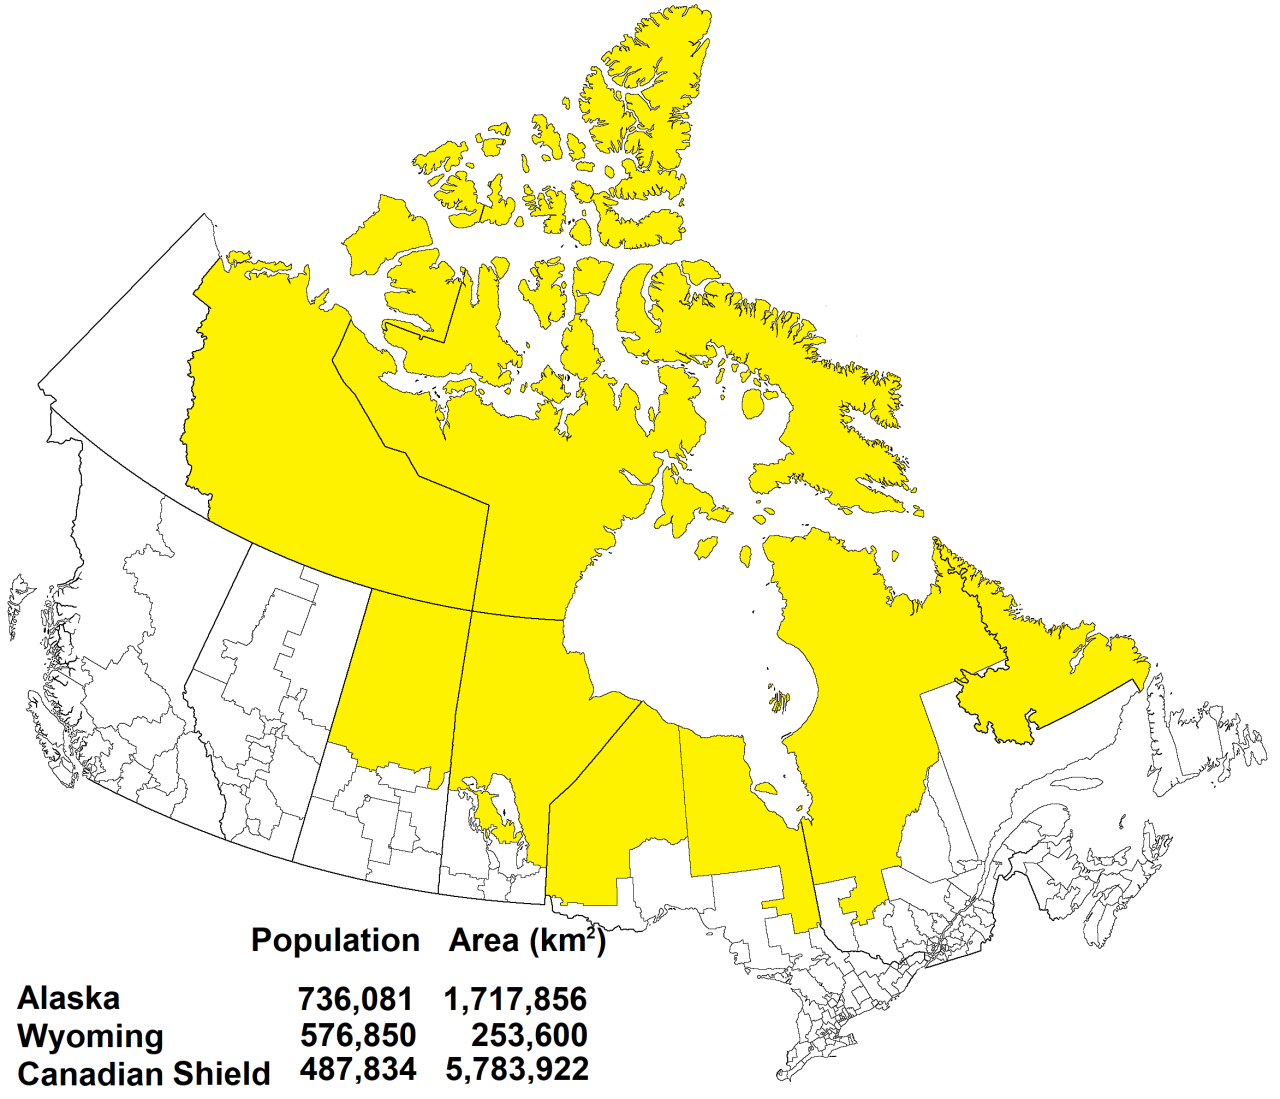 The sparsity of the Canadian Shield
by u/repliers_beware
[[MORE]]“ The Canadian Shield is a geological formation surrounding Hudson Bay. The region is very inhospitable for agriculture as well as having harsh climates. I used a map of federal...